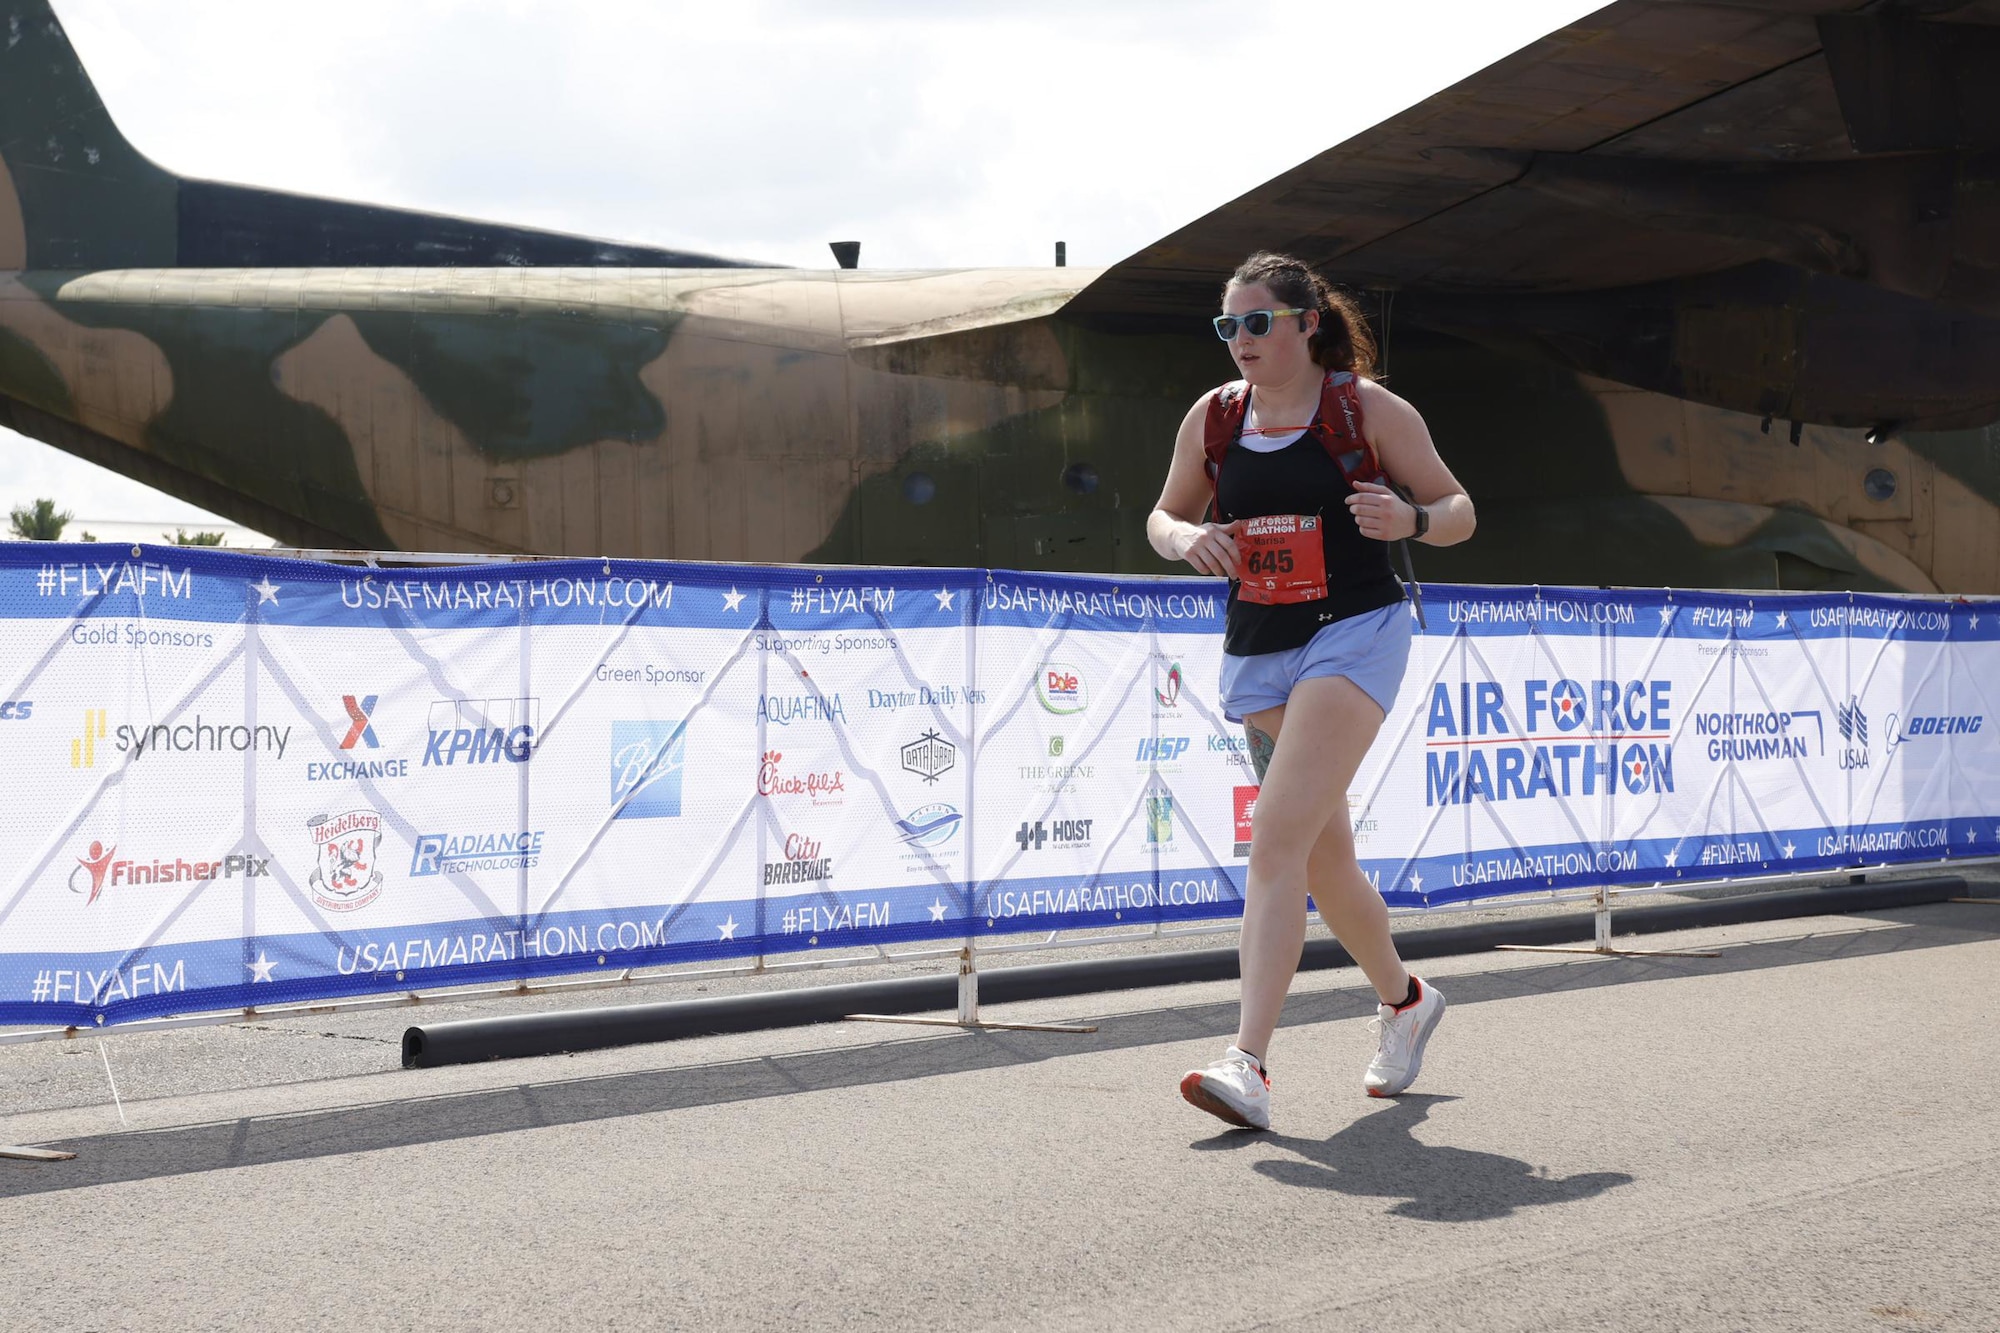 U.S. Air Force Tech. Sgt. Marisa Onofrio, a physical therapist assigned to the 6th Medical Group, competes in the 2022 Air Force Marathon at Wright-Patterson Air Force Base, Ohio, Sept. 17, 2022. More than 8,500 runners from 50 states and 18 countries participated in the race to commemorate the marathon’s 26th year. (Photo courtesy of U.S. Air Force Tech. Sgt. Marisa Onofrio)